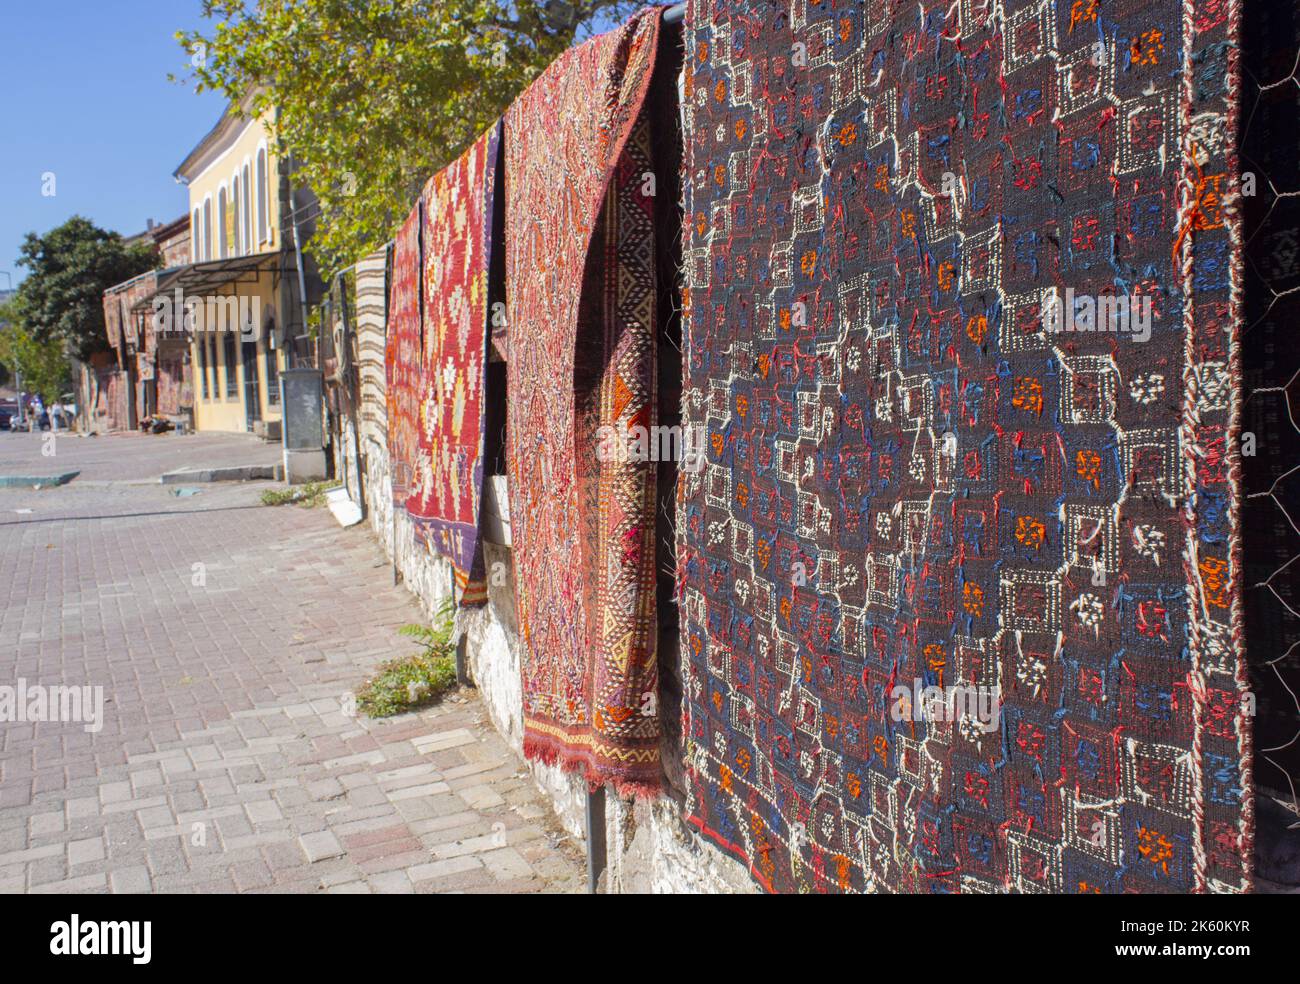 Handmade traditional rugs, hand weaving traditional rugs hanging on the wall on street, close up Stock Photo